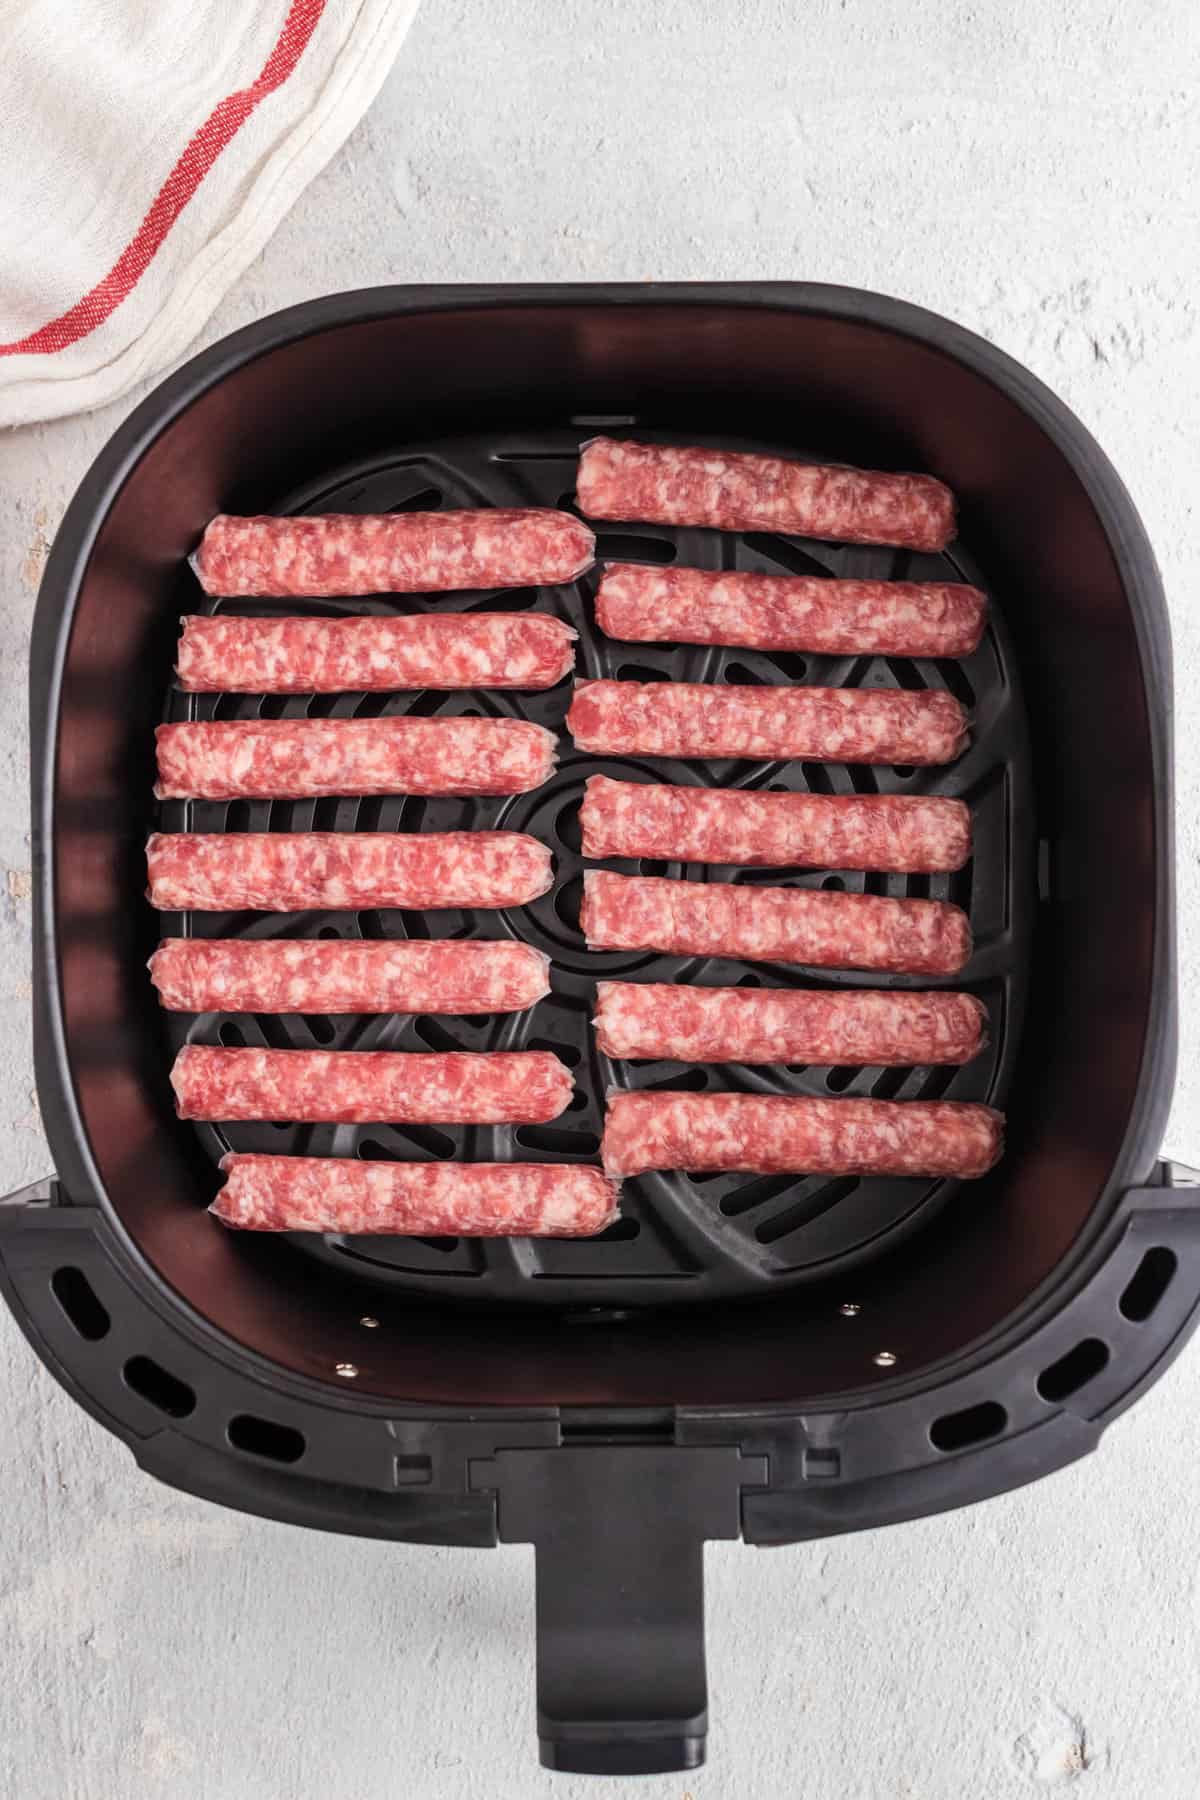 Uncooked Breakfast Sausage in Air Fryer well spaced